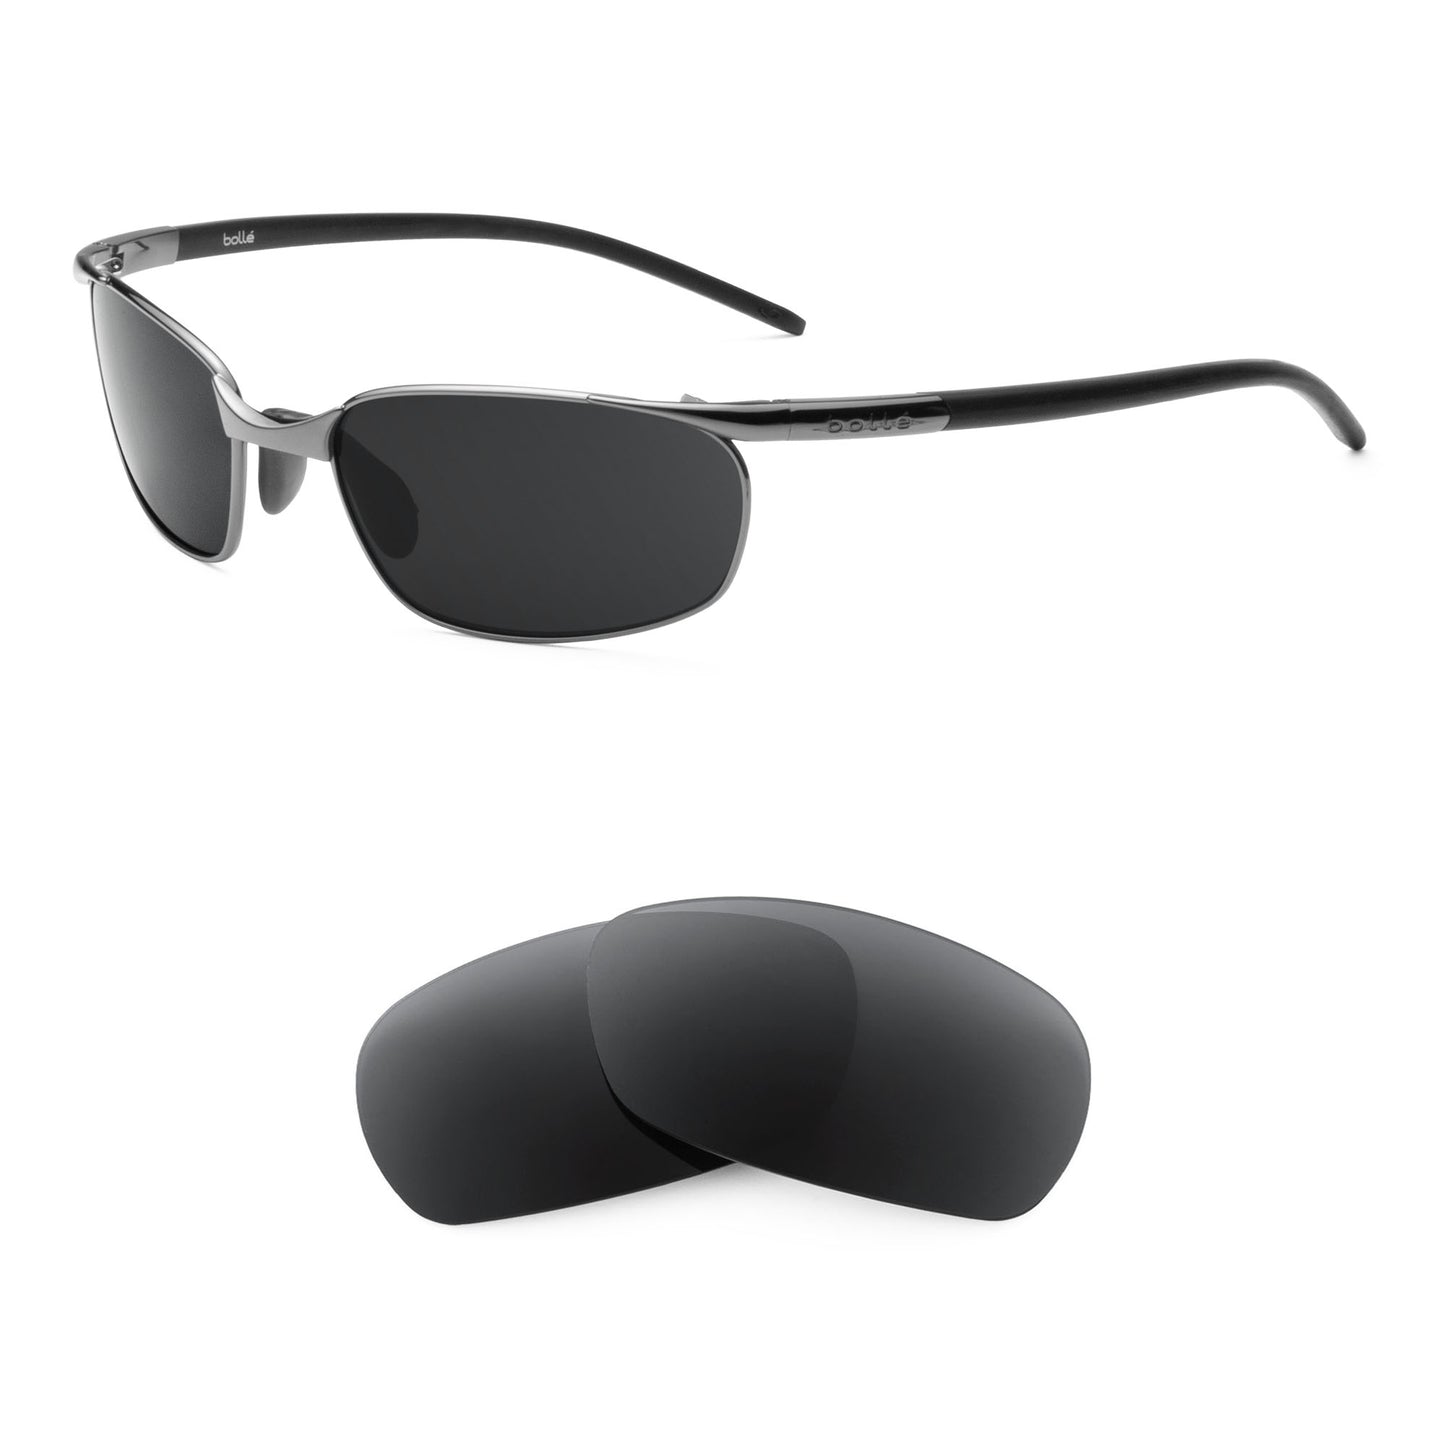 Bolle Lift sunglasses with replacement lenses